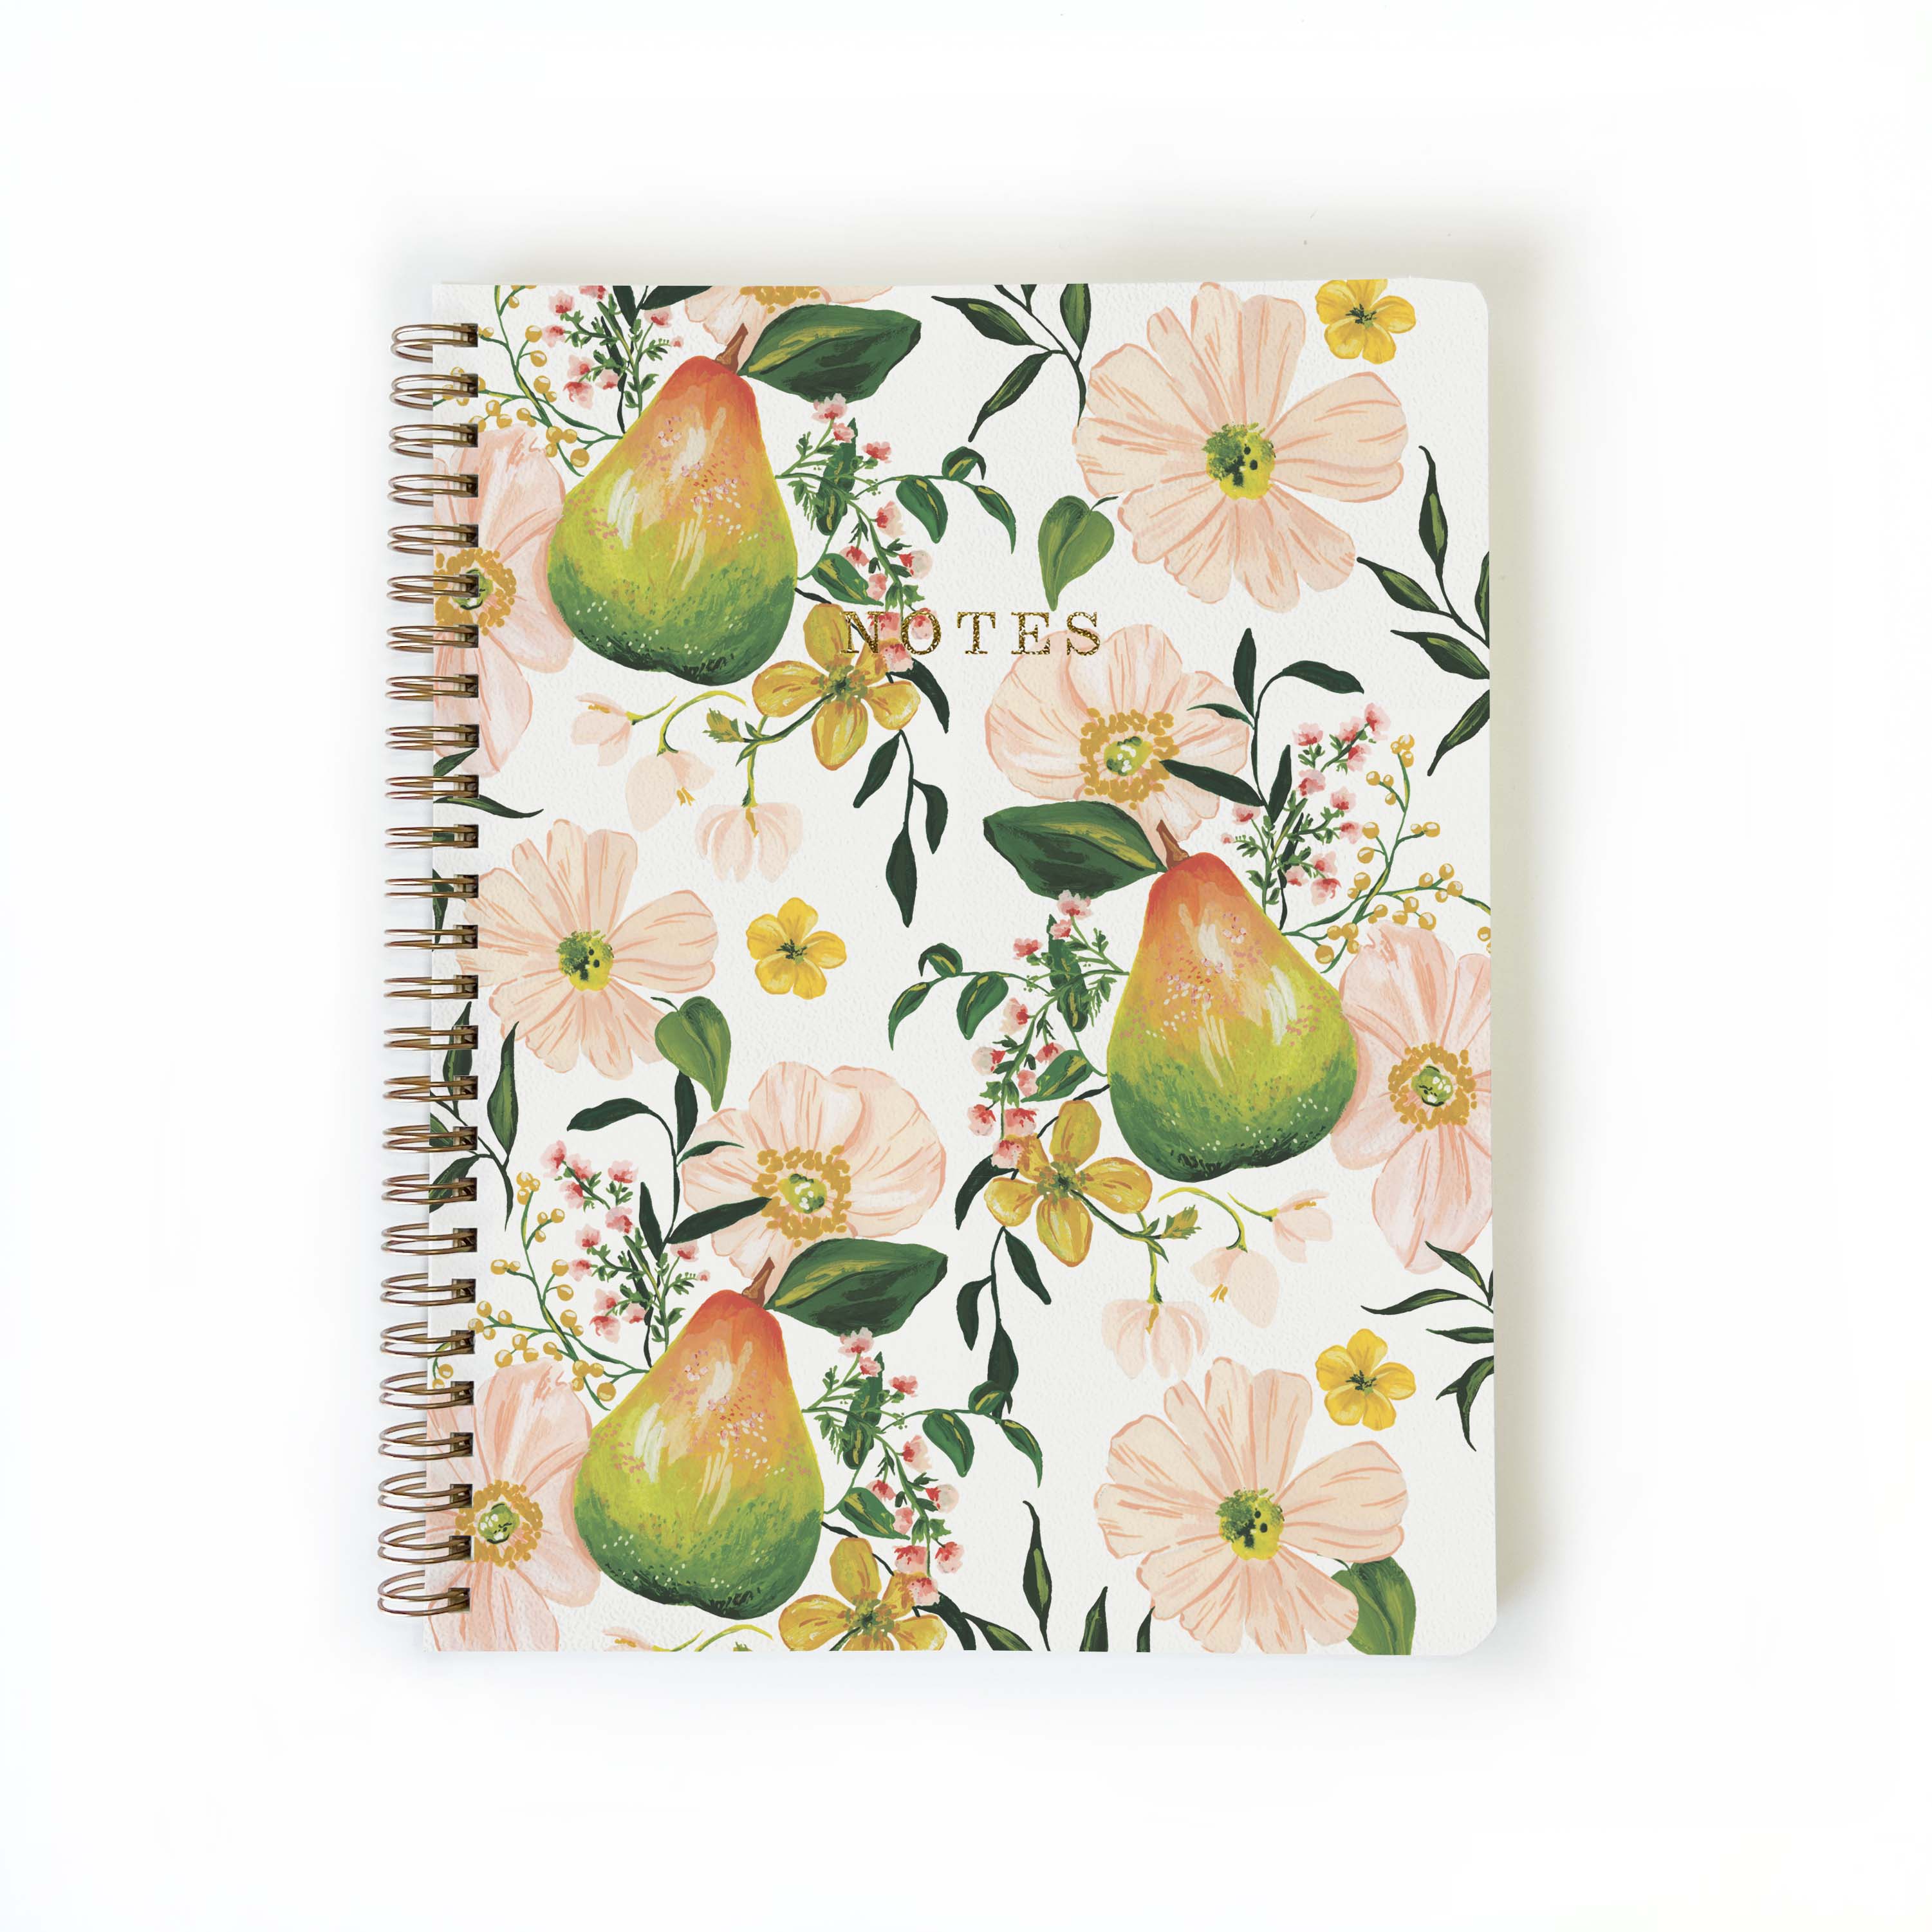 Pear Orchard Notebook Journal: Small Notebook / Blank Pages